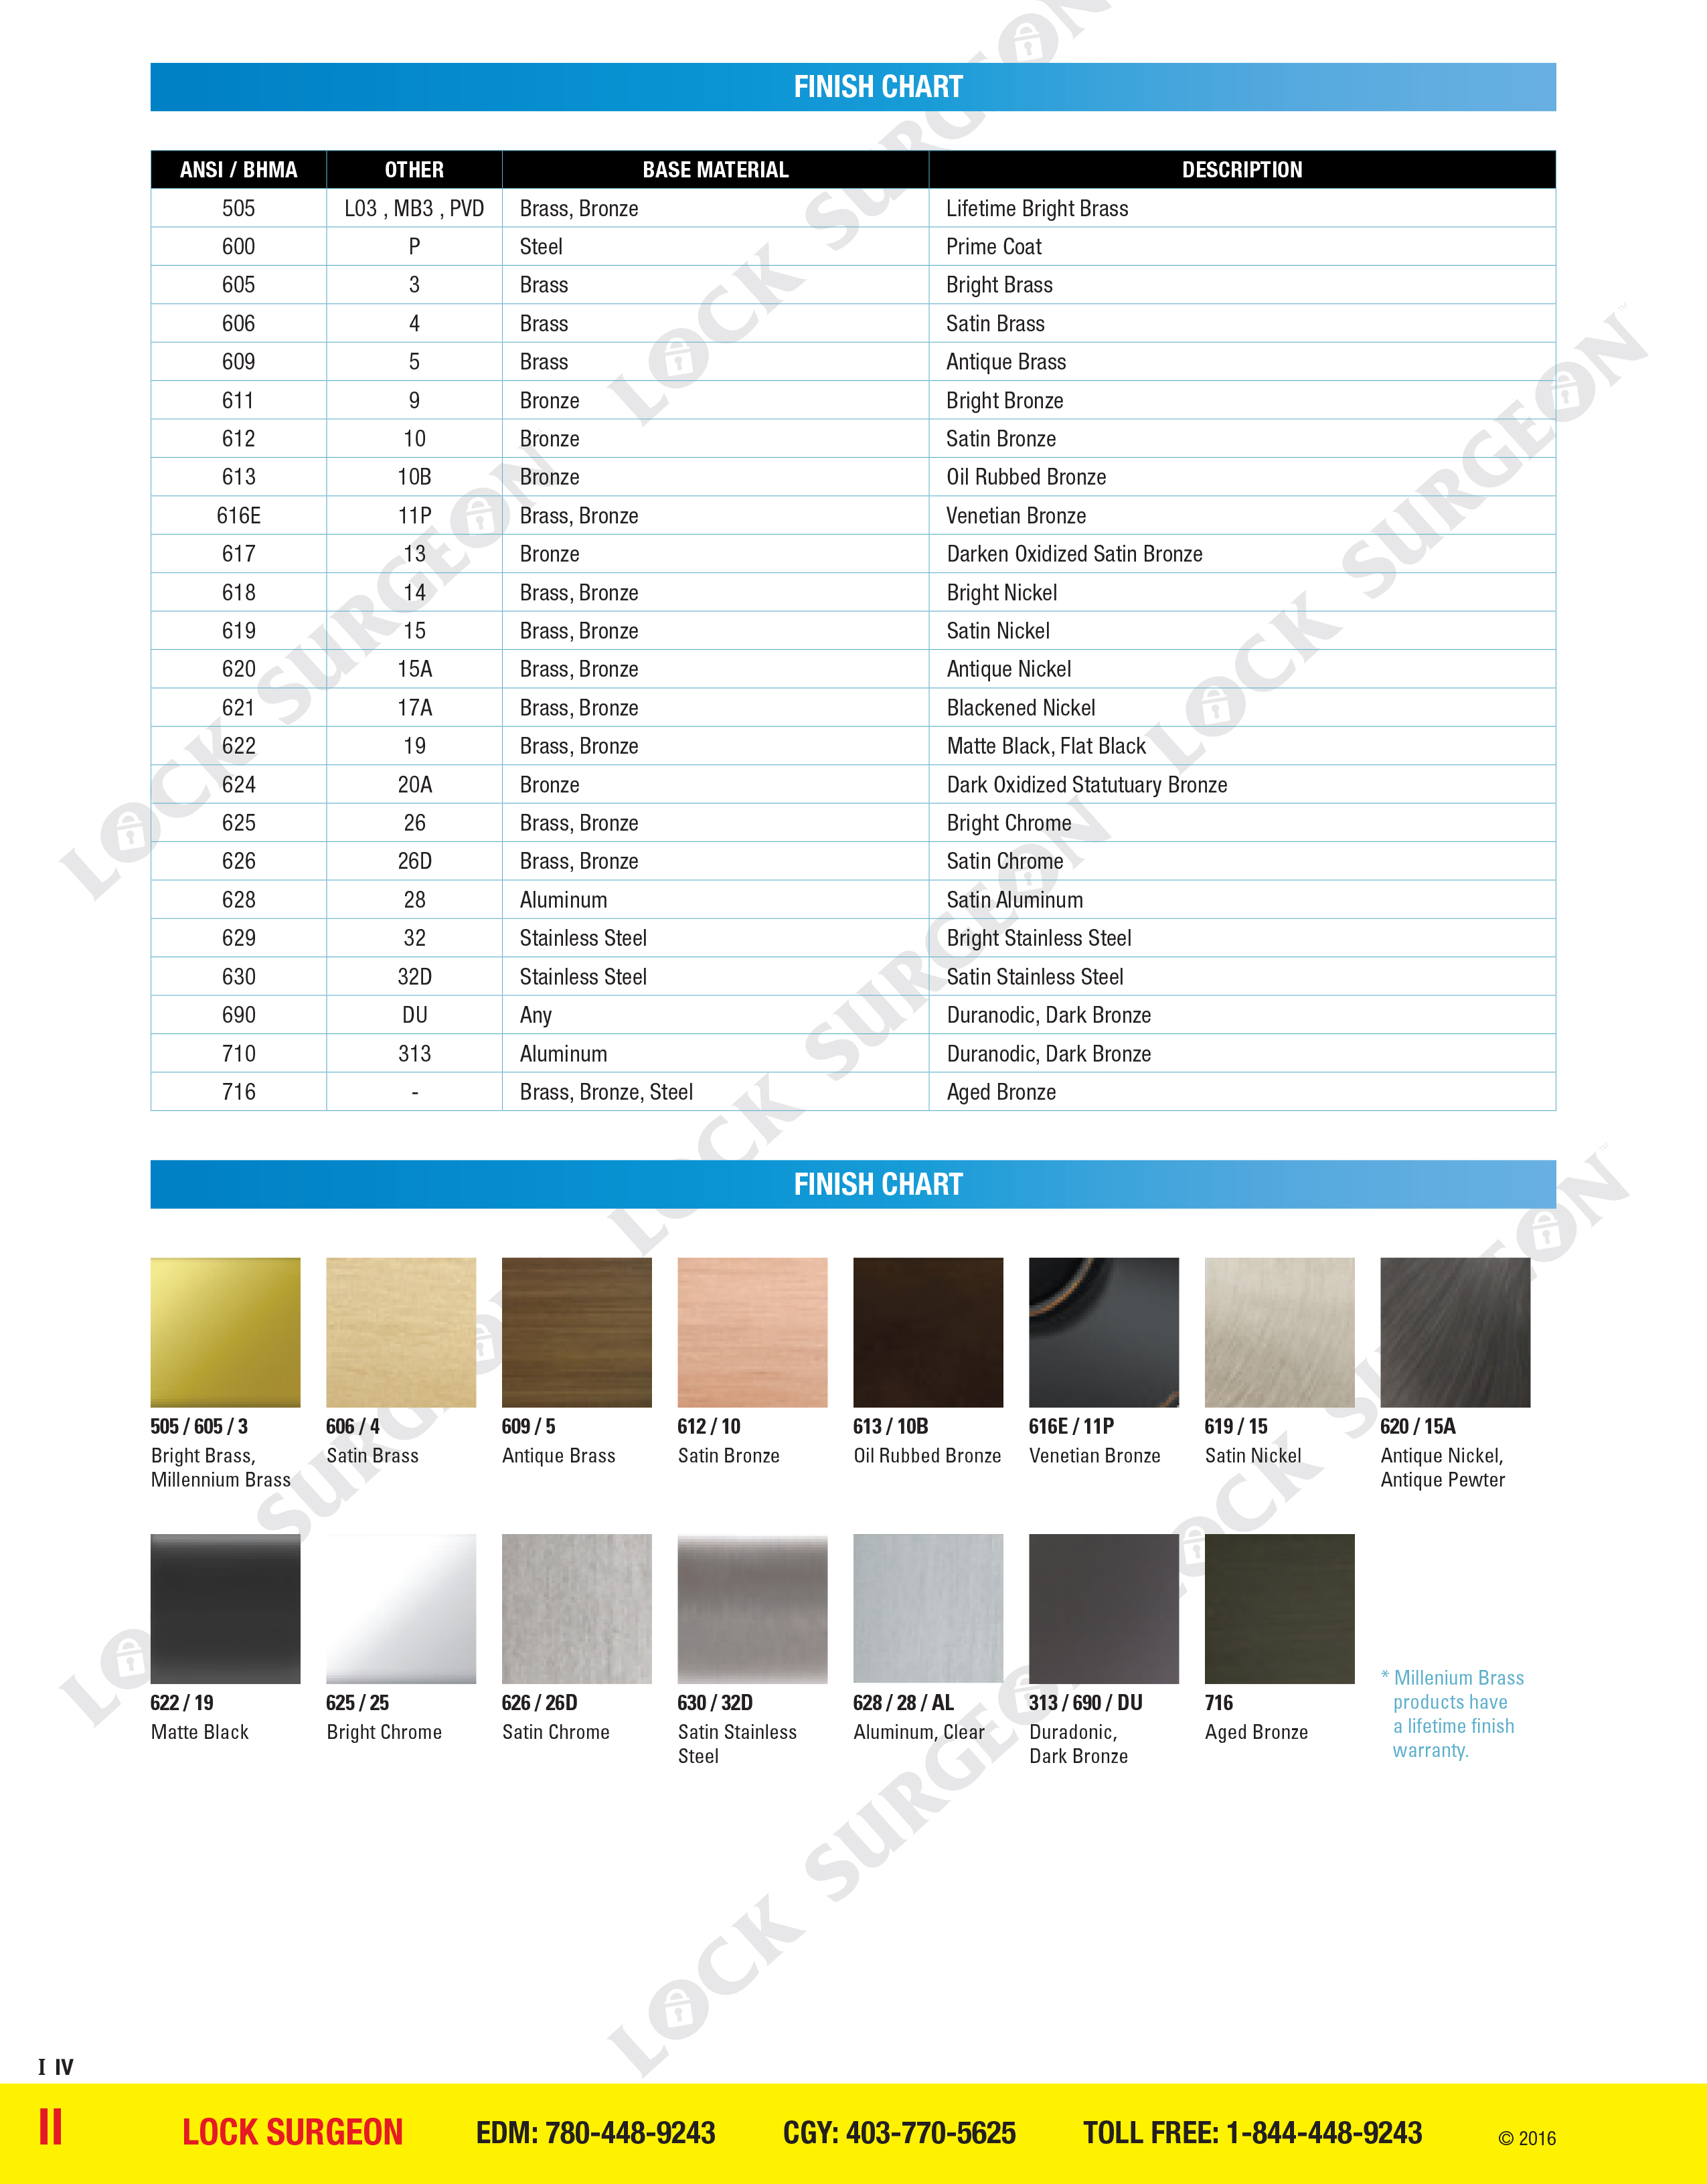 Colour reference chart for colour finishes on door handle hardware products St. Albert.